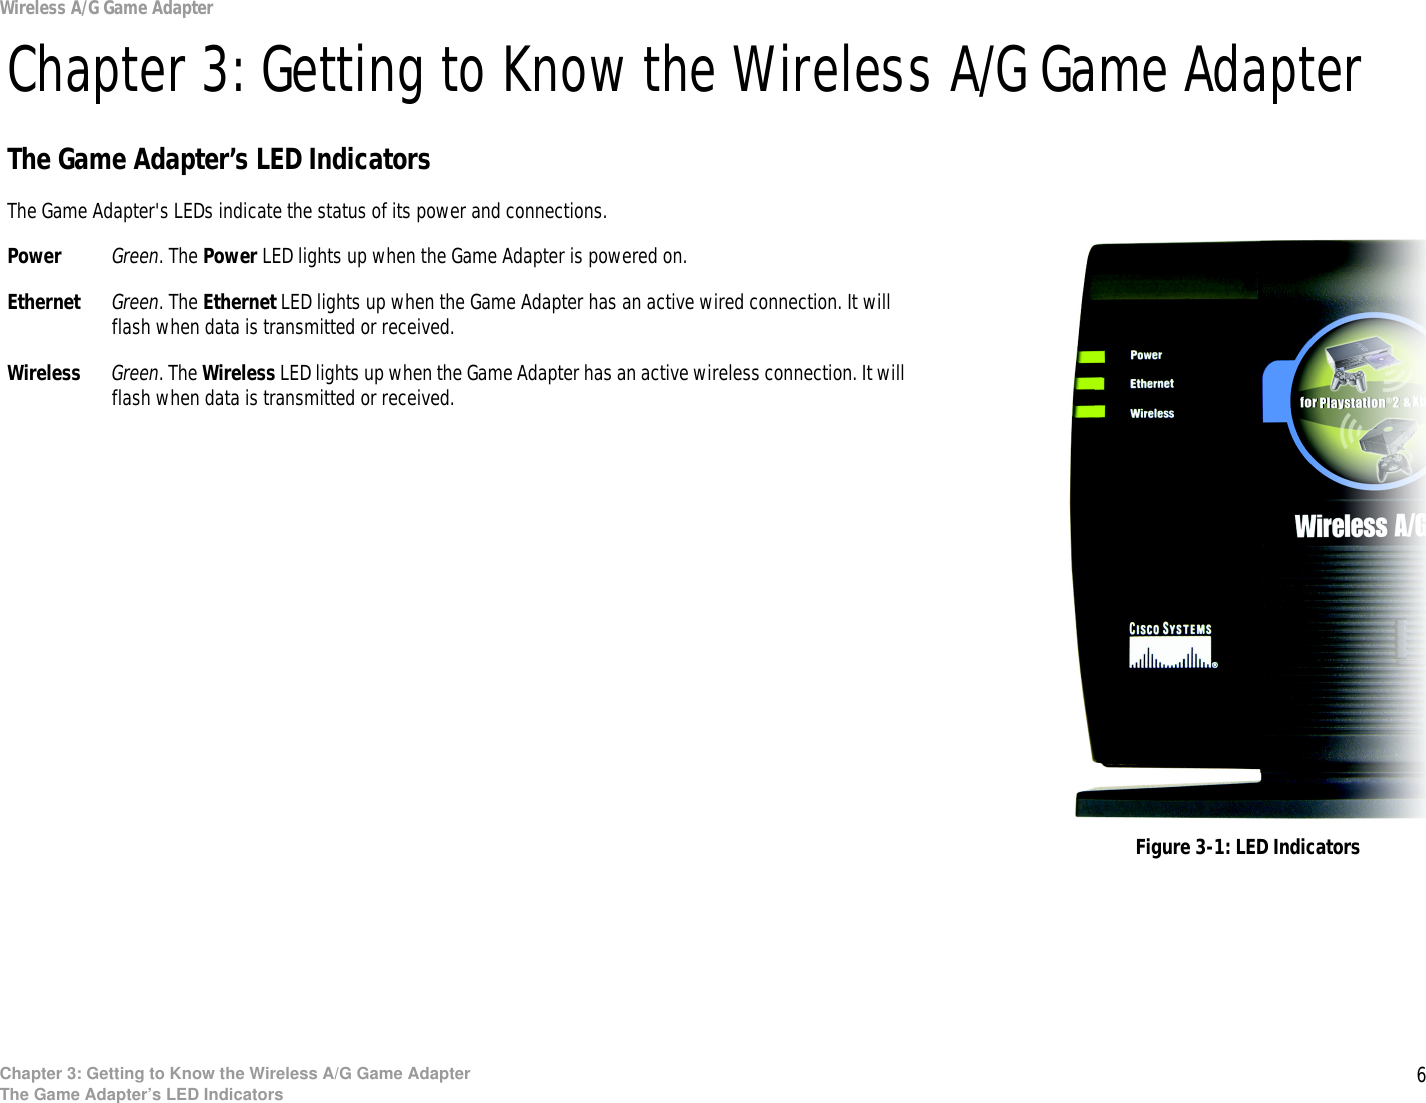 6Chapter 3: Getting to Know the Wireless A/G Game AdapterThe Game Adapter’s LED IndicatorsWireless A/G Game AdapterChapter 3: Getting to Know the Wireless A/G Game AdapterThe Game Adapter’s LED IndicatorsThe Game Adapter&apos;s LEDs indicate the status of its power and connections.Power Green. The Power LED lights up when the Game Adapter is powered on.Ethernet Green. The Ethernet LED lights up when the Game Adapter has an active wired connection. It will flash when data is transmitted or received.Wireless Green. The Wireless LED lights up when the Game Adapter has an active wireless connection. It will flash when data is transmitted or received.Figure 3-1: LED Indicators